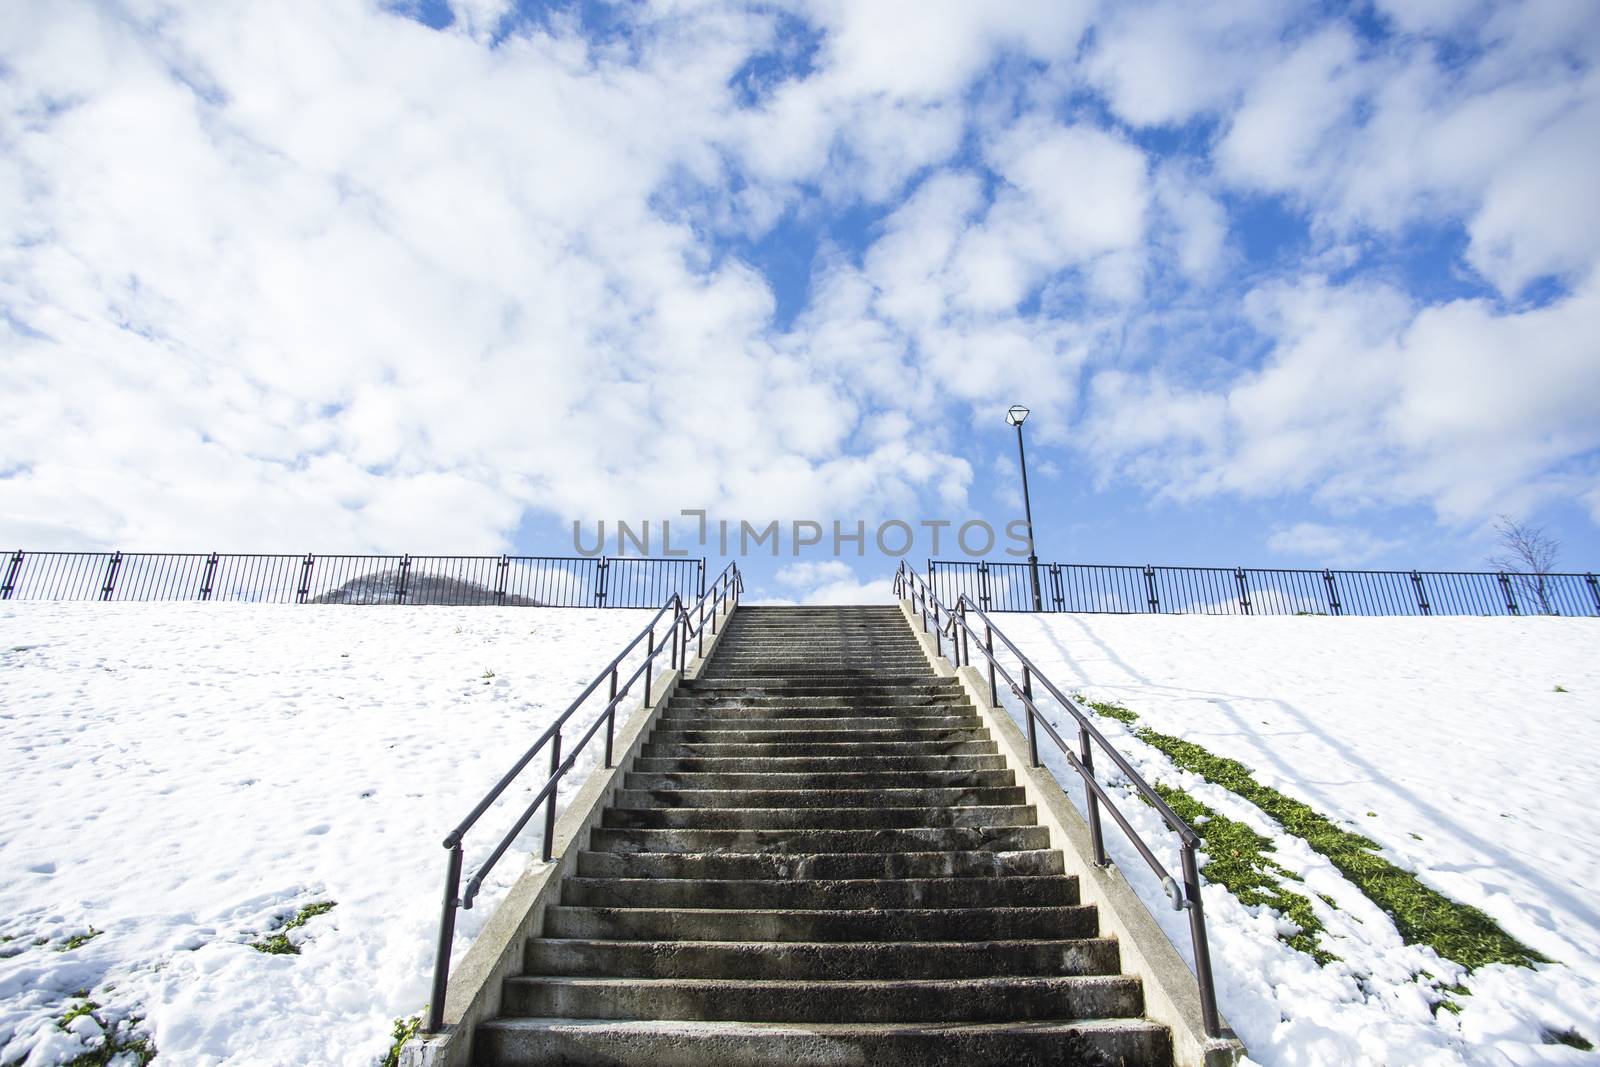 Stairway in park winter season with snow